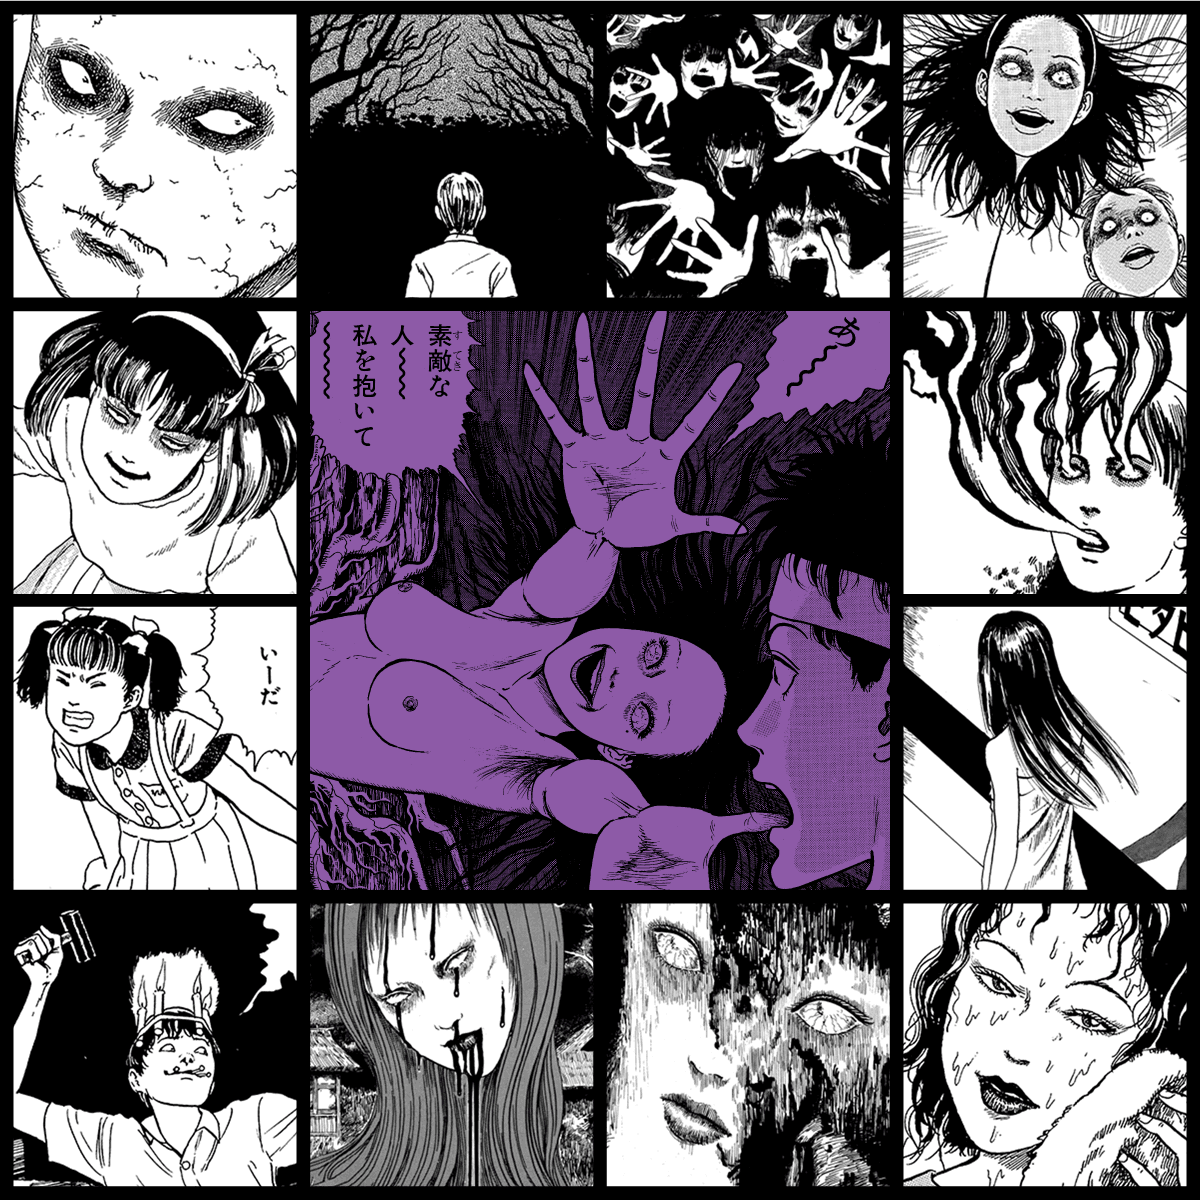 TOMIE by Junji Ito #286